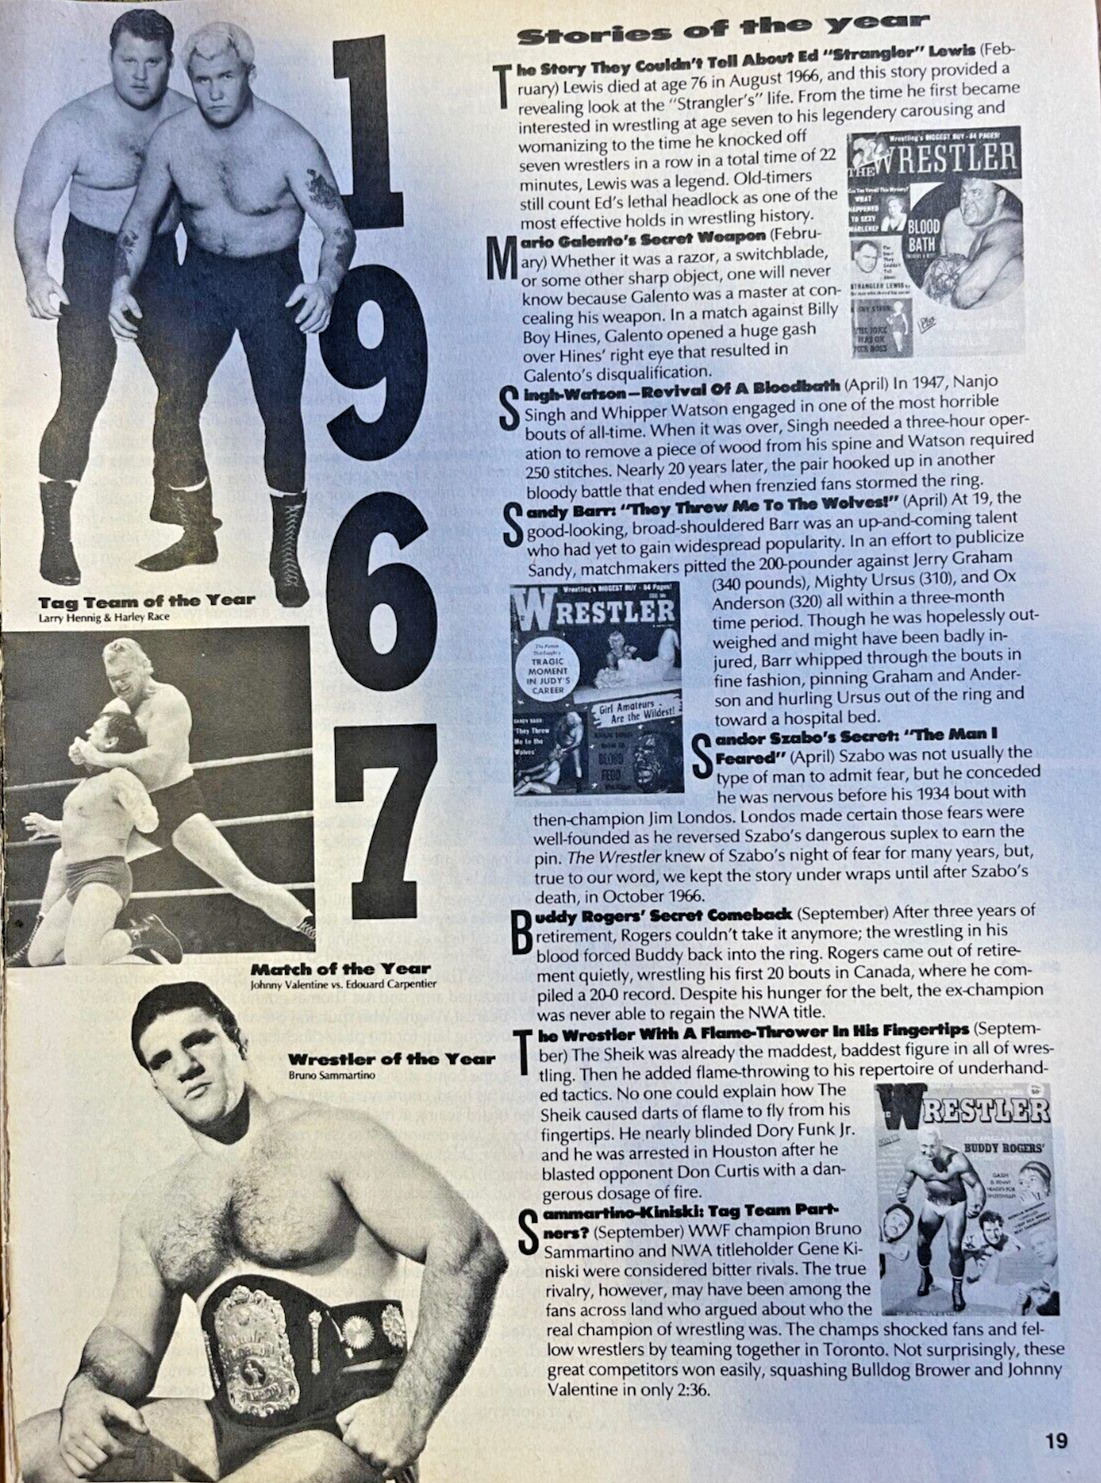 1991 Pro Wrestling Highlights From 1967 to 1990 illustrated